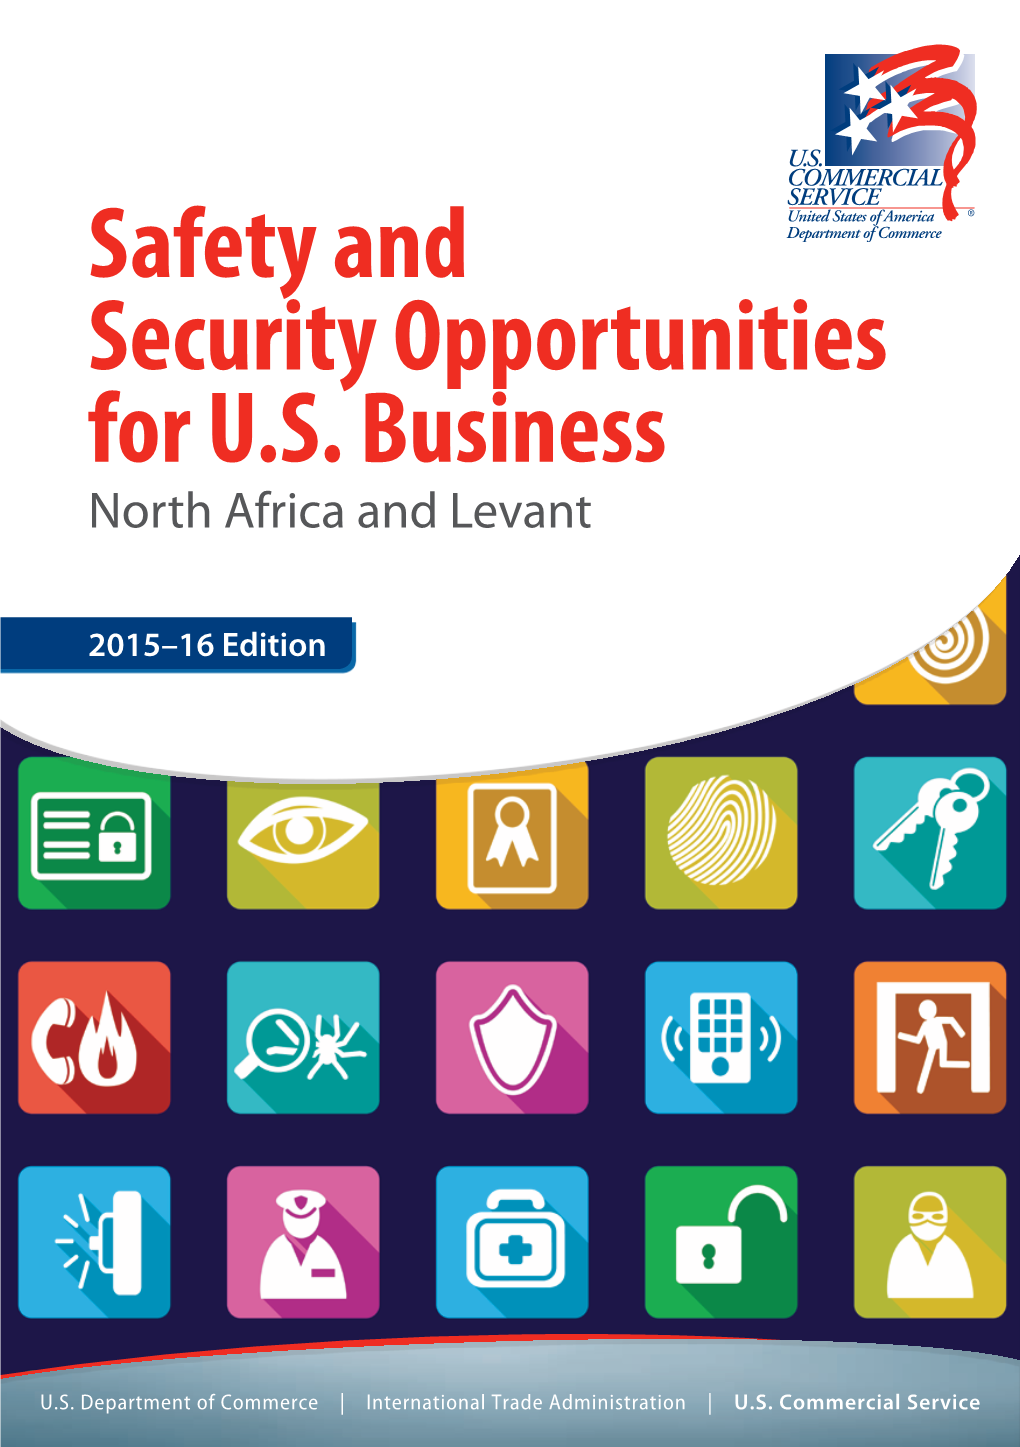 Safety and Security Opportunities for U.S. Business North Africa and Levant